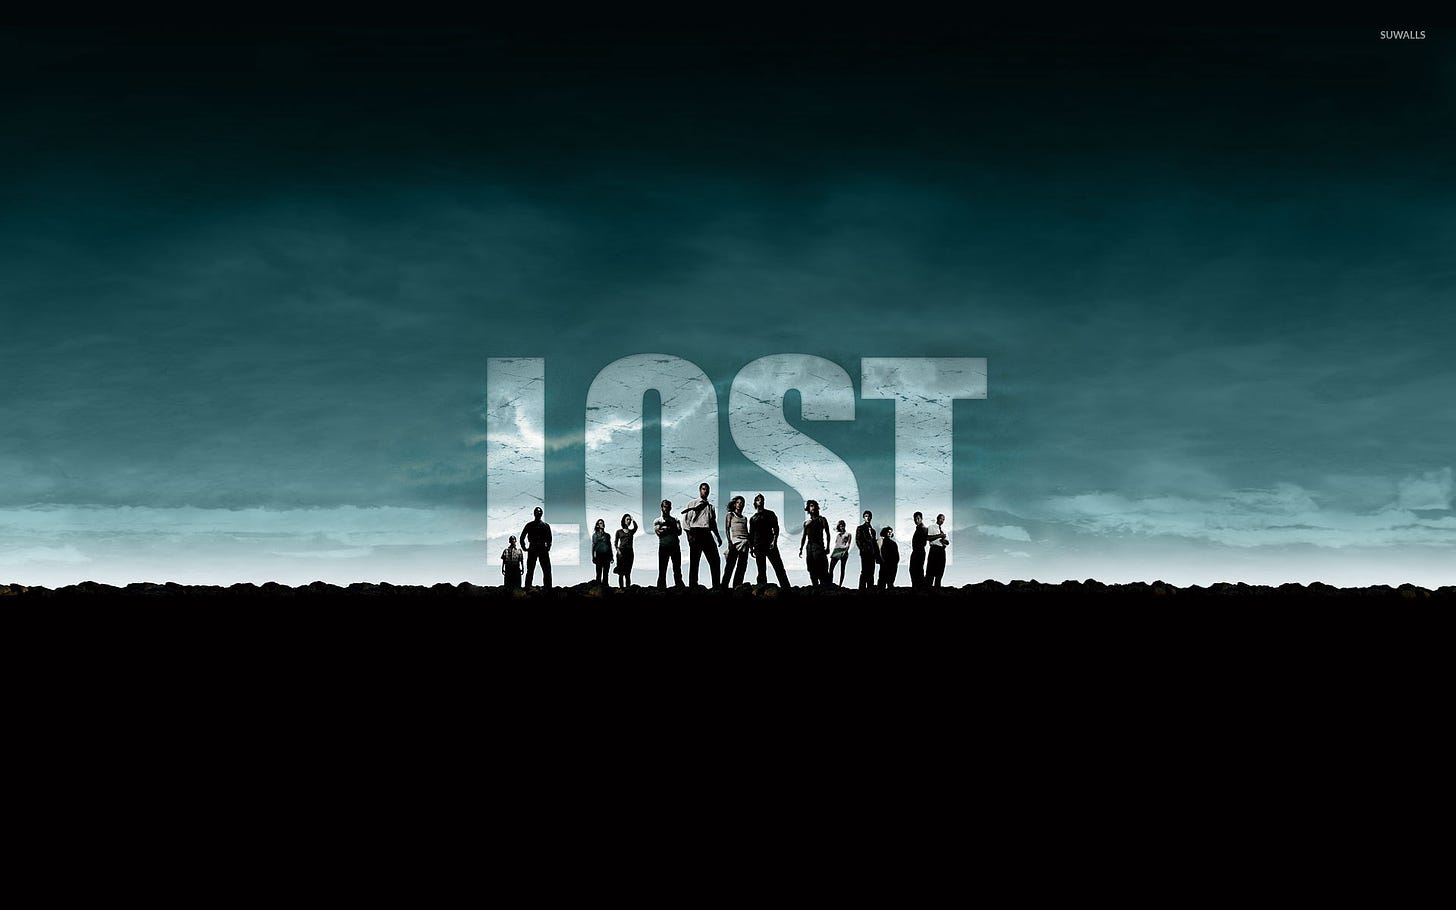 Lost TV show poster, click on it to check out the show.